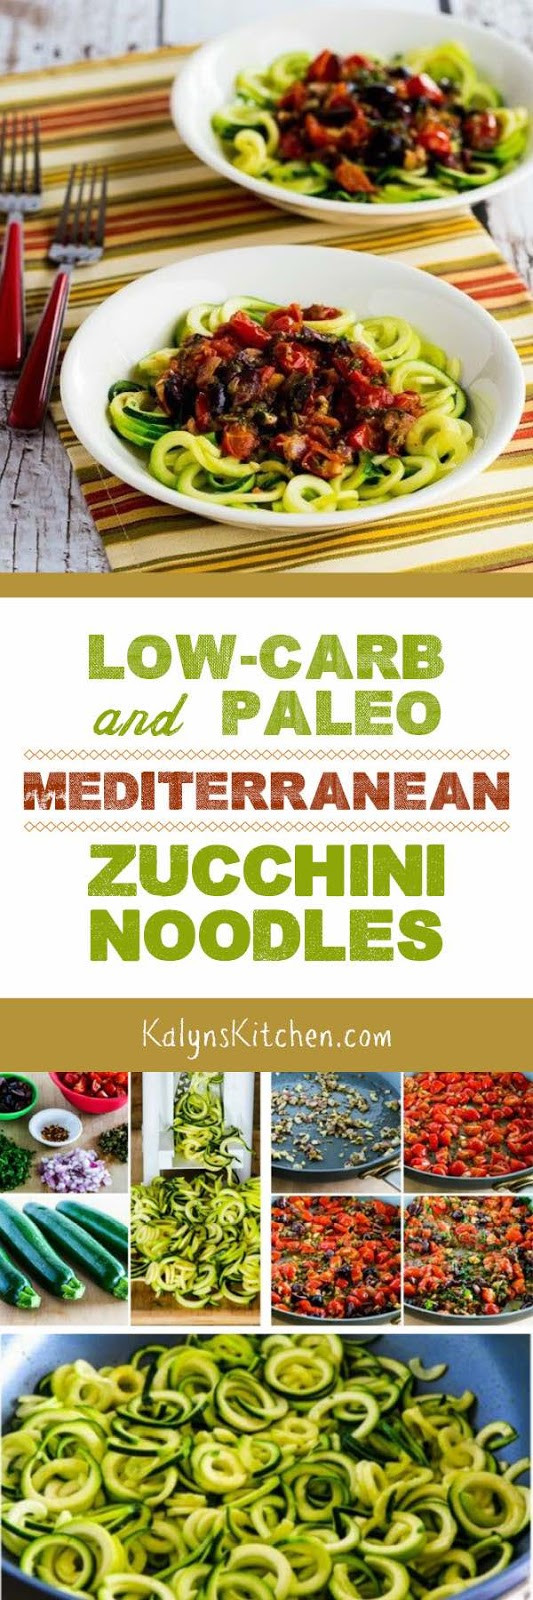 Low Carb Mediterranean Diet Recipes
 Low Carb and Paleo Mediterranean Zucchini Noodles Kalyn